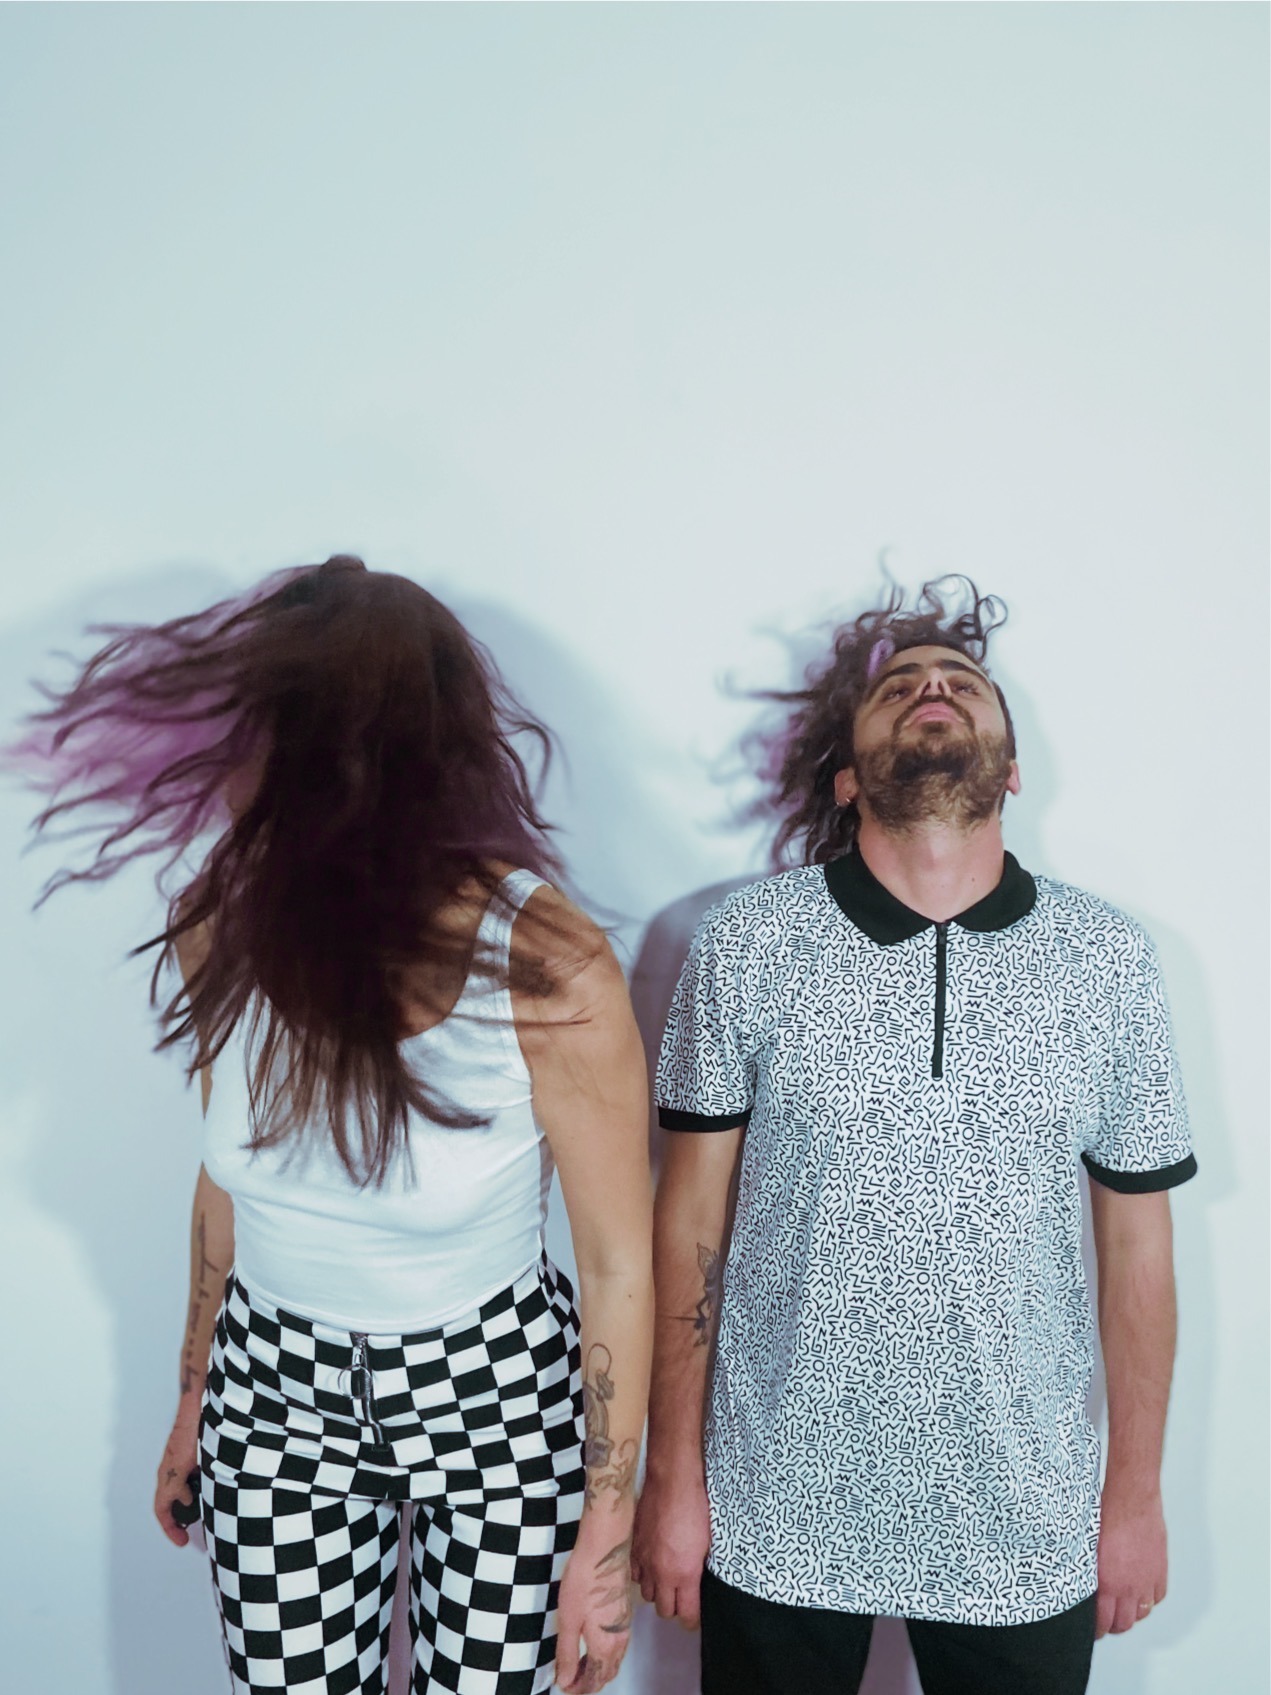 They Met At Berklee College of Music, They Are Now The EDM Duo Eflorem – “With You”